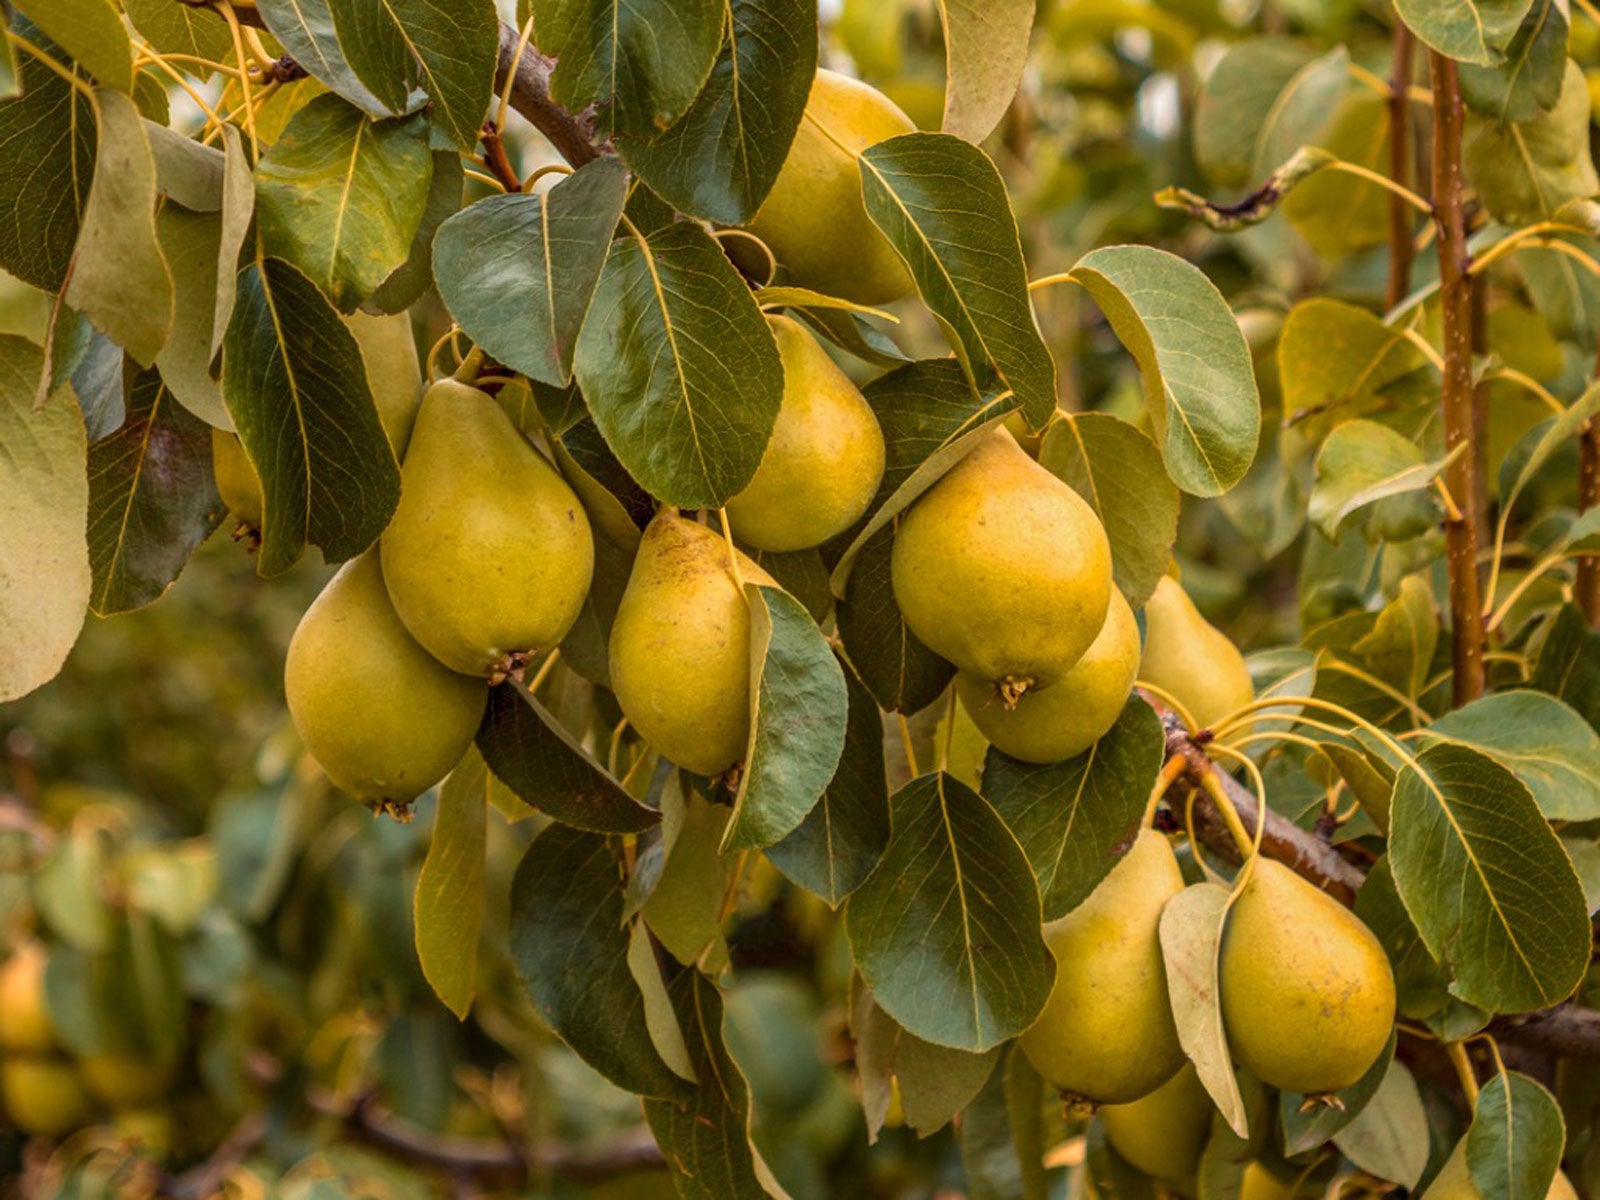 Growing Pear Trees: Tips For The Care Of Pear Trees